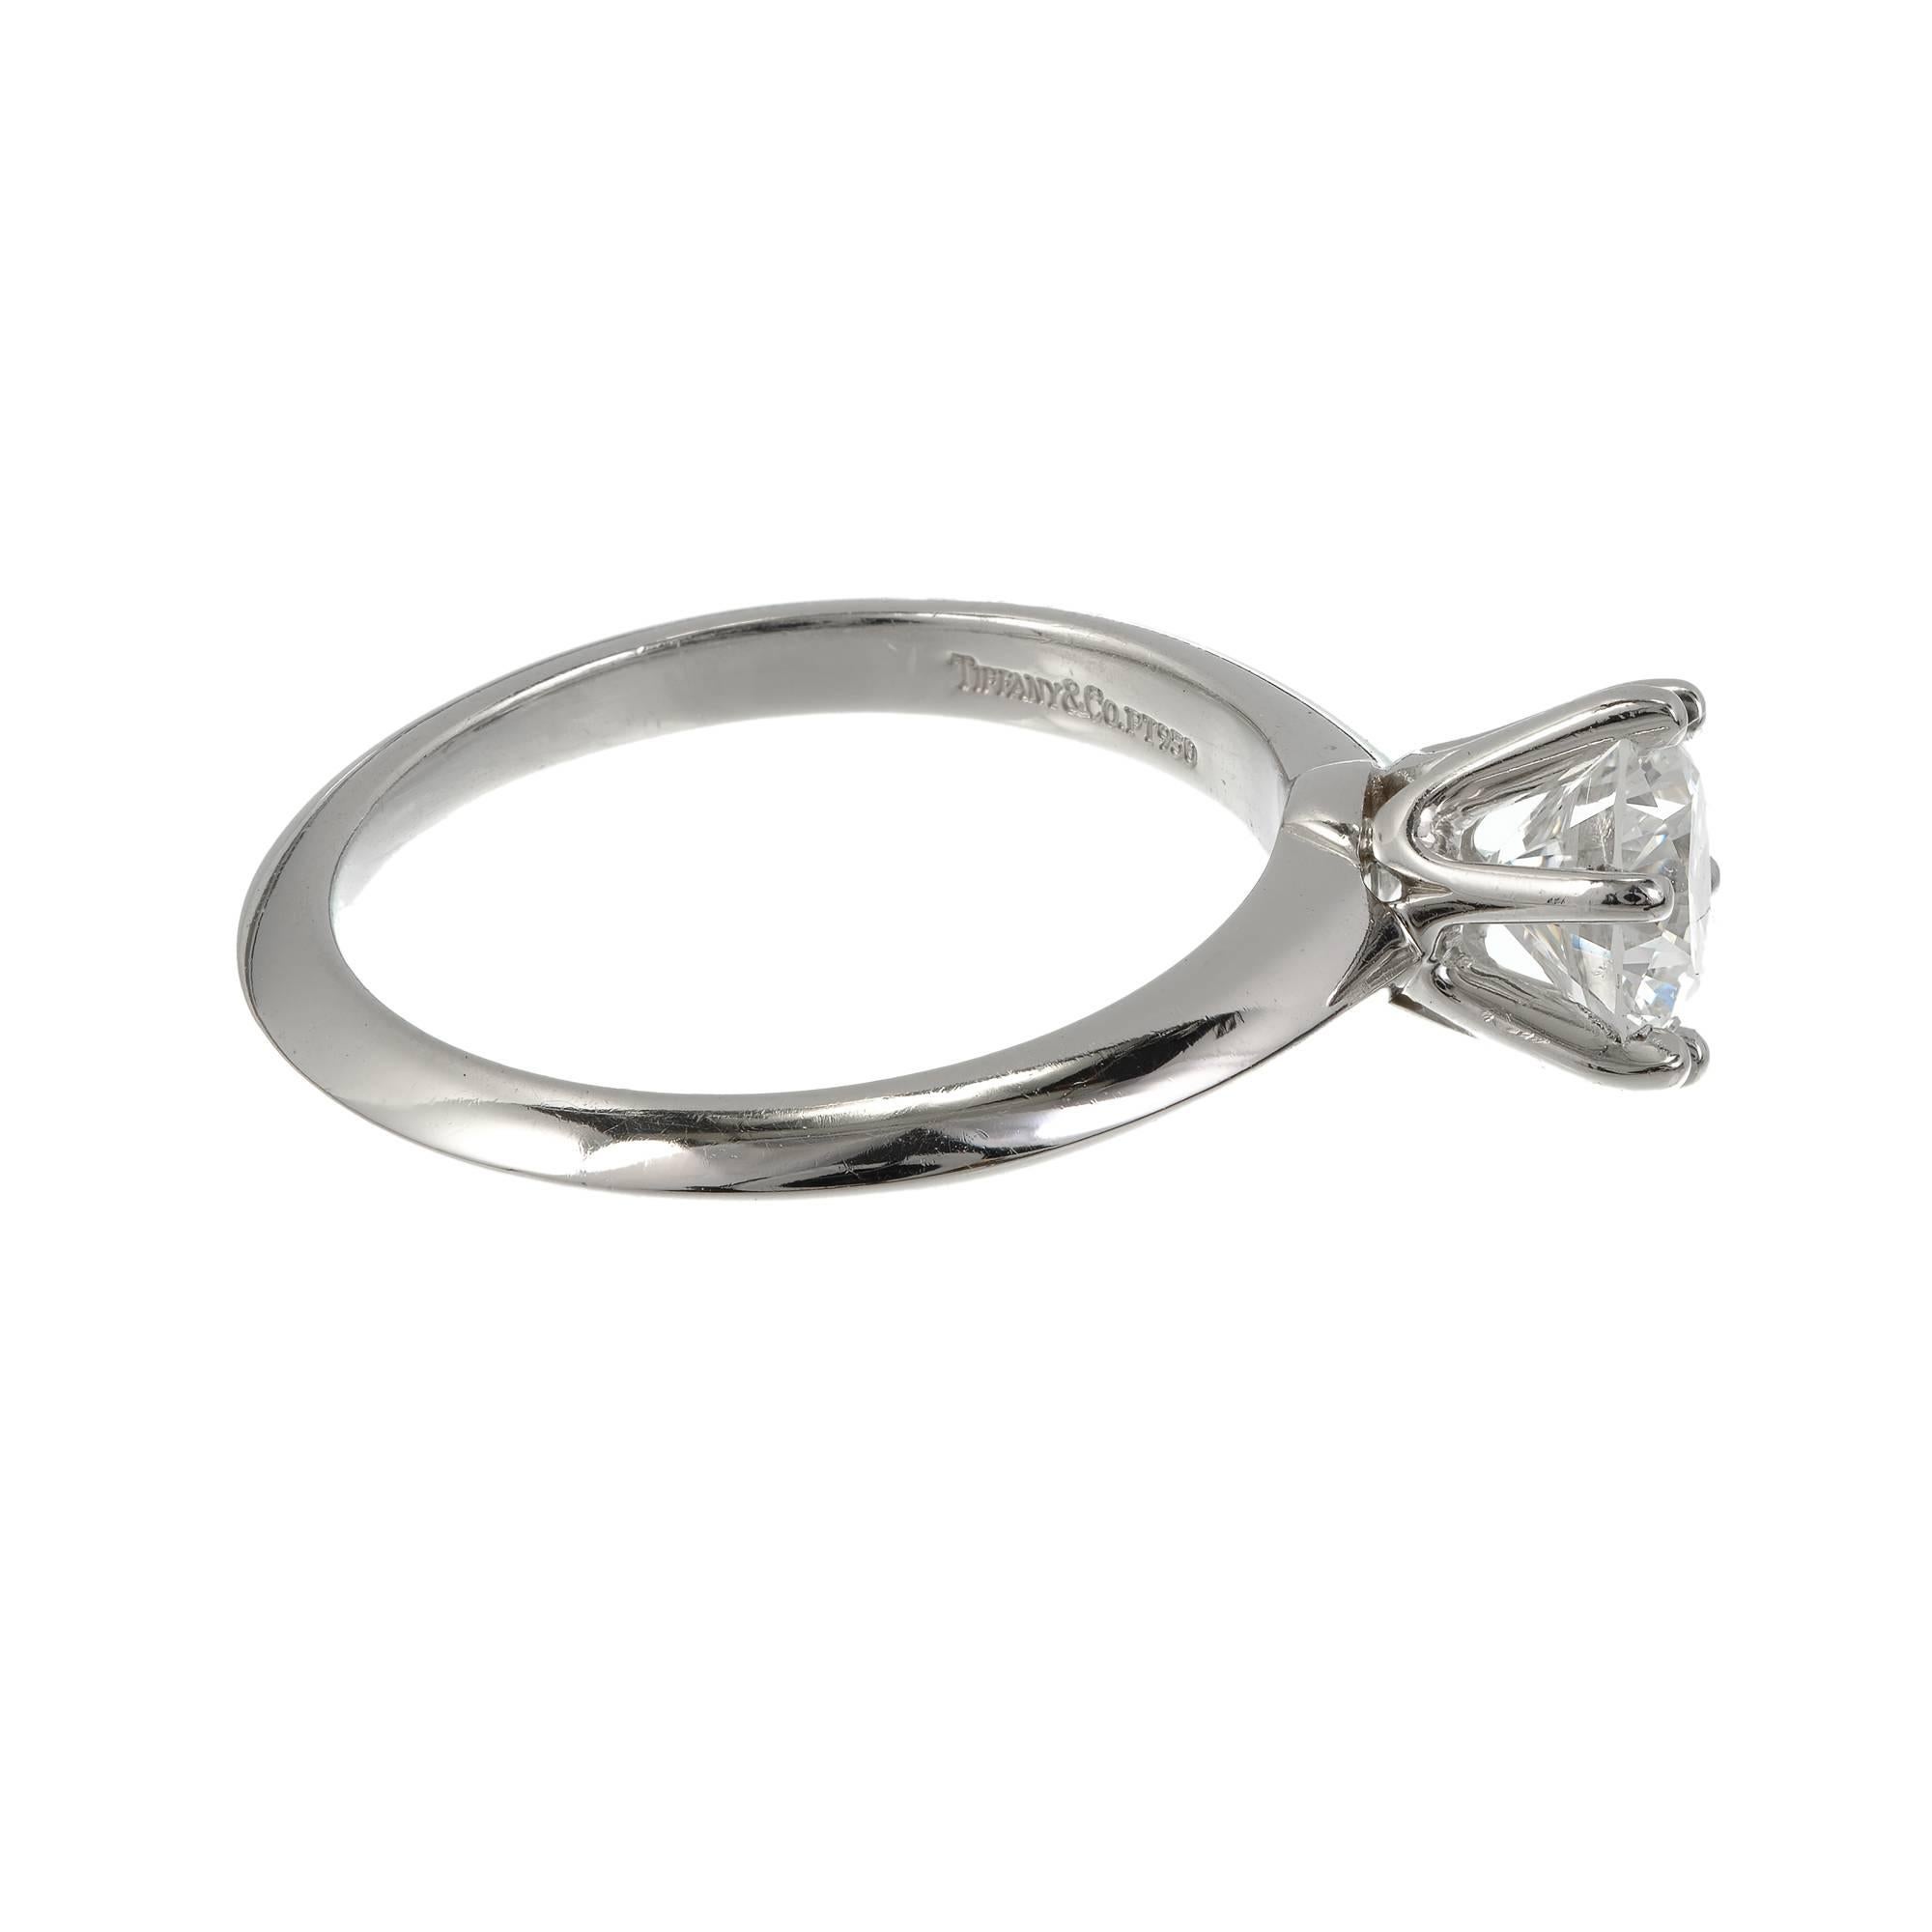 Tiffany & Co. 1.00 Carat Diamond Platinum Solitaire Engagement Ring In Good Condition For Sale In Stamford, CT